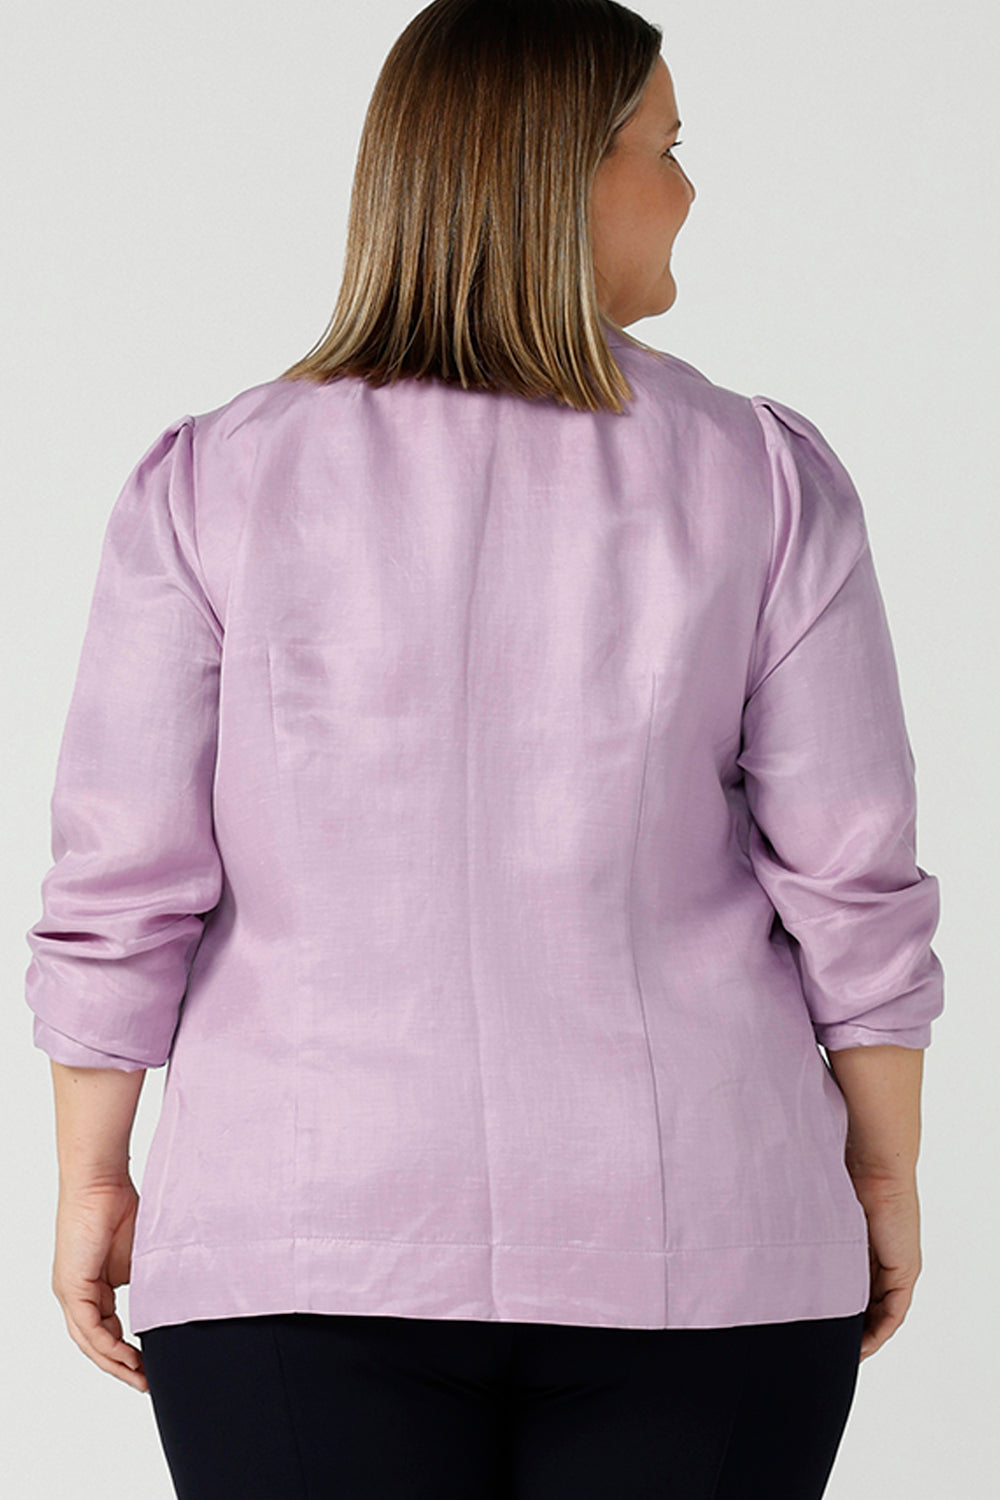 Back view of a size 18 curvy woman wears a linen blend blazer in lilac with a shawl collar. Soft tailoring details with shoulder tucks. Made in Australia size 8 - 24.